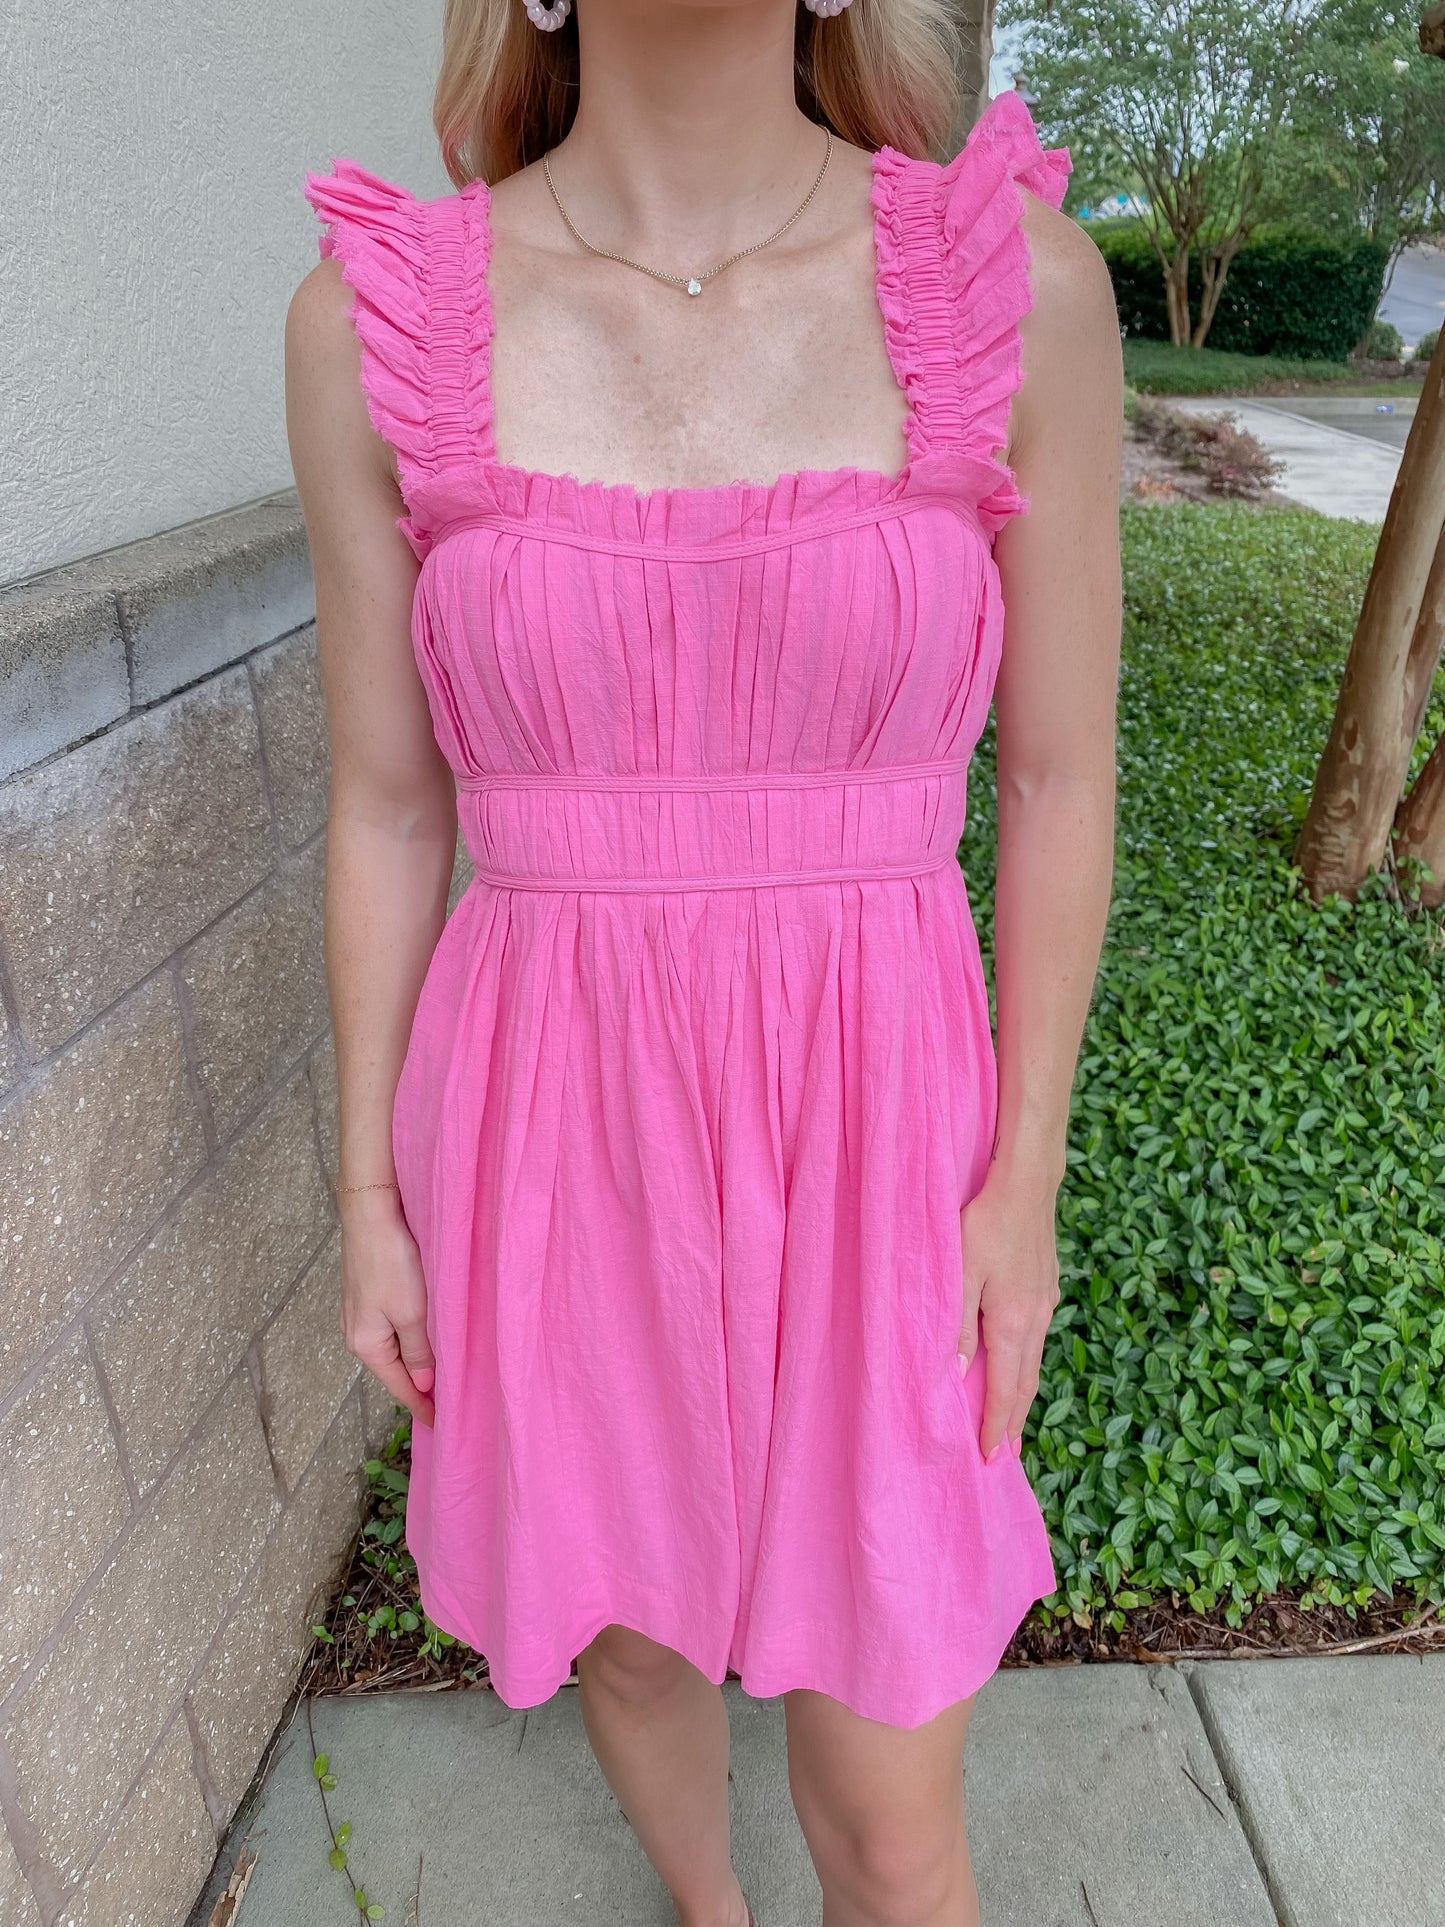 Living On The Edge Dress: Pink